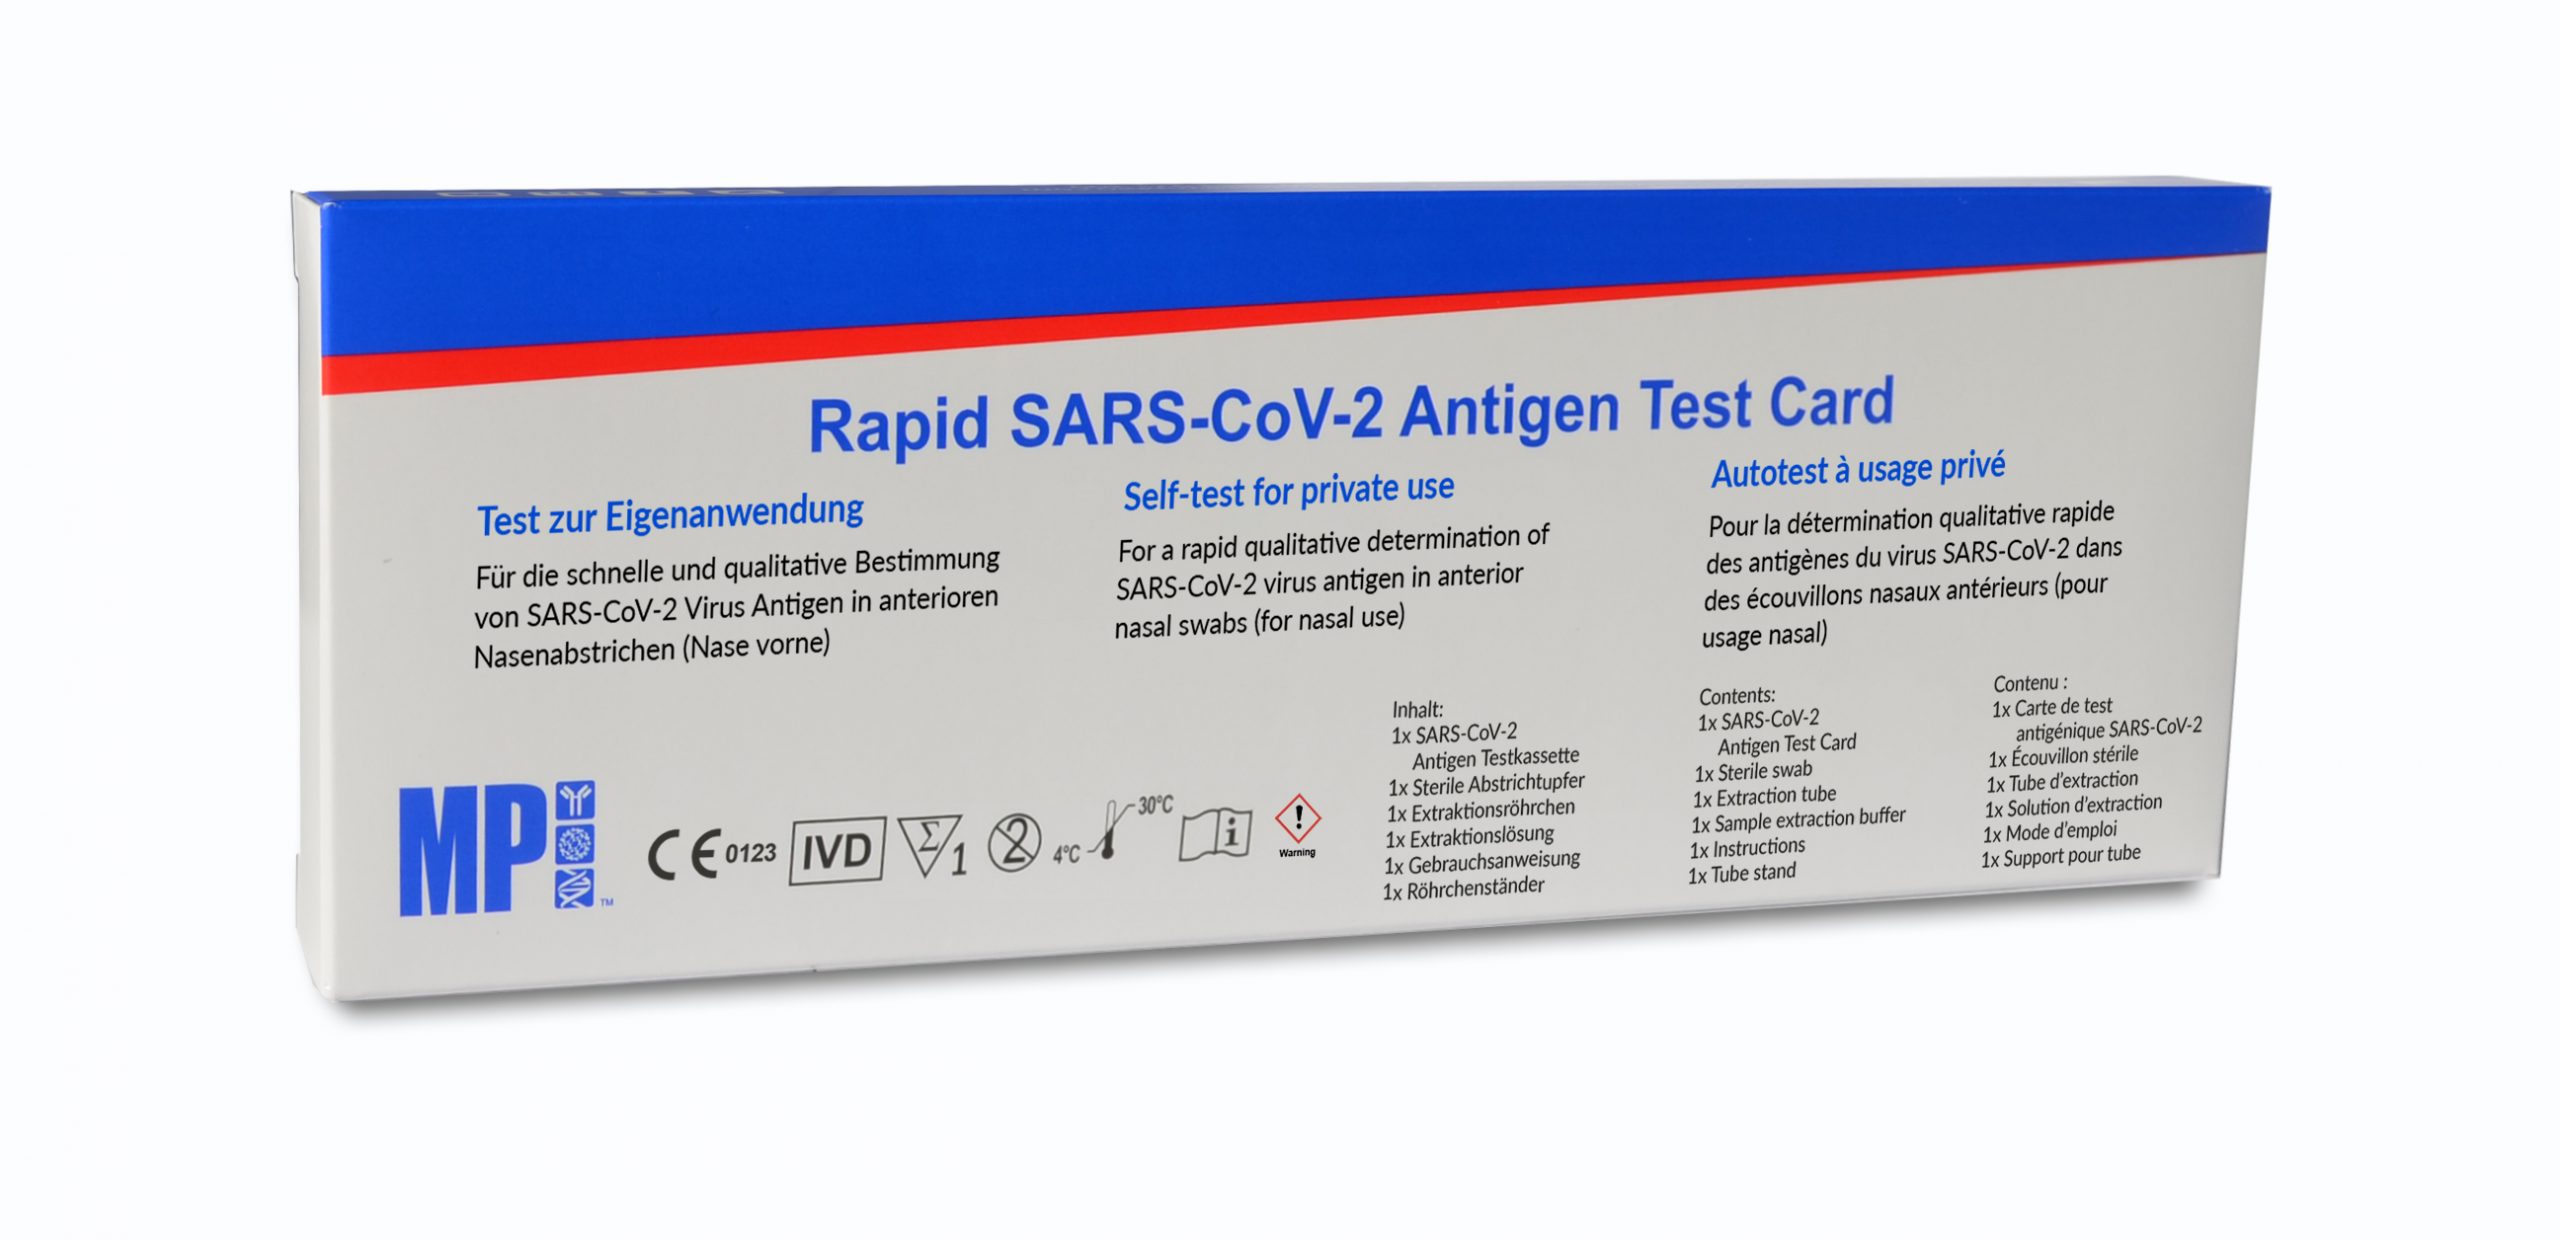 Circle K now selling Covid-19 antigen tests across its service station network